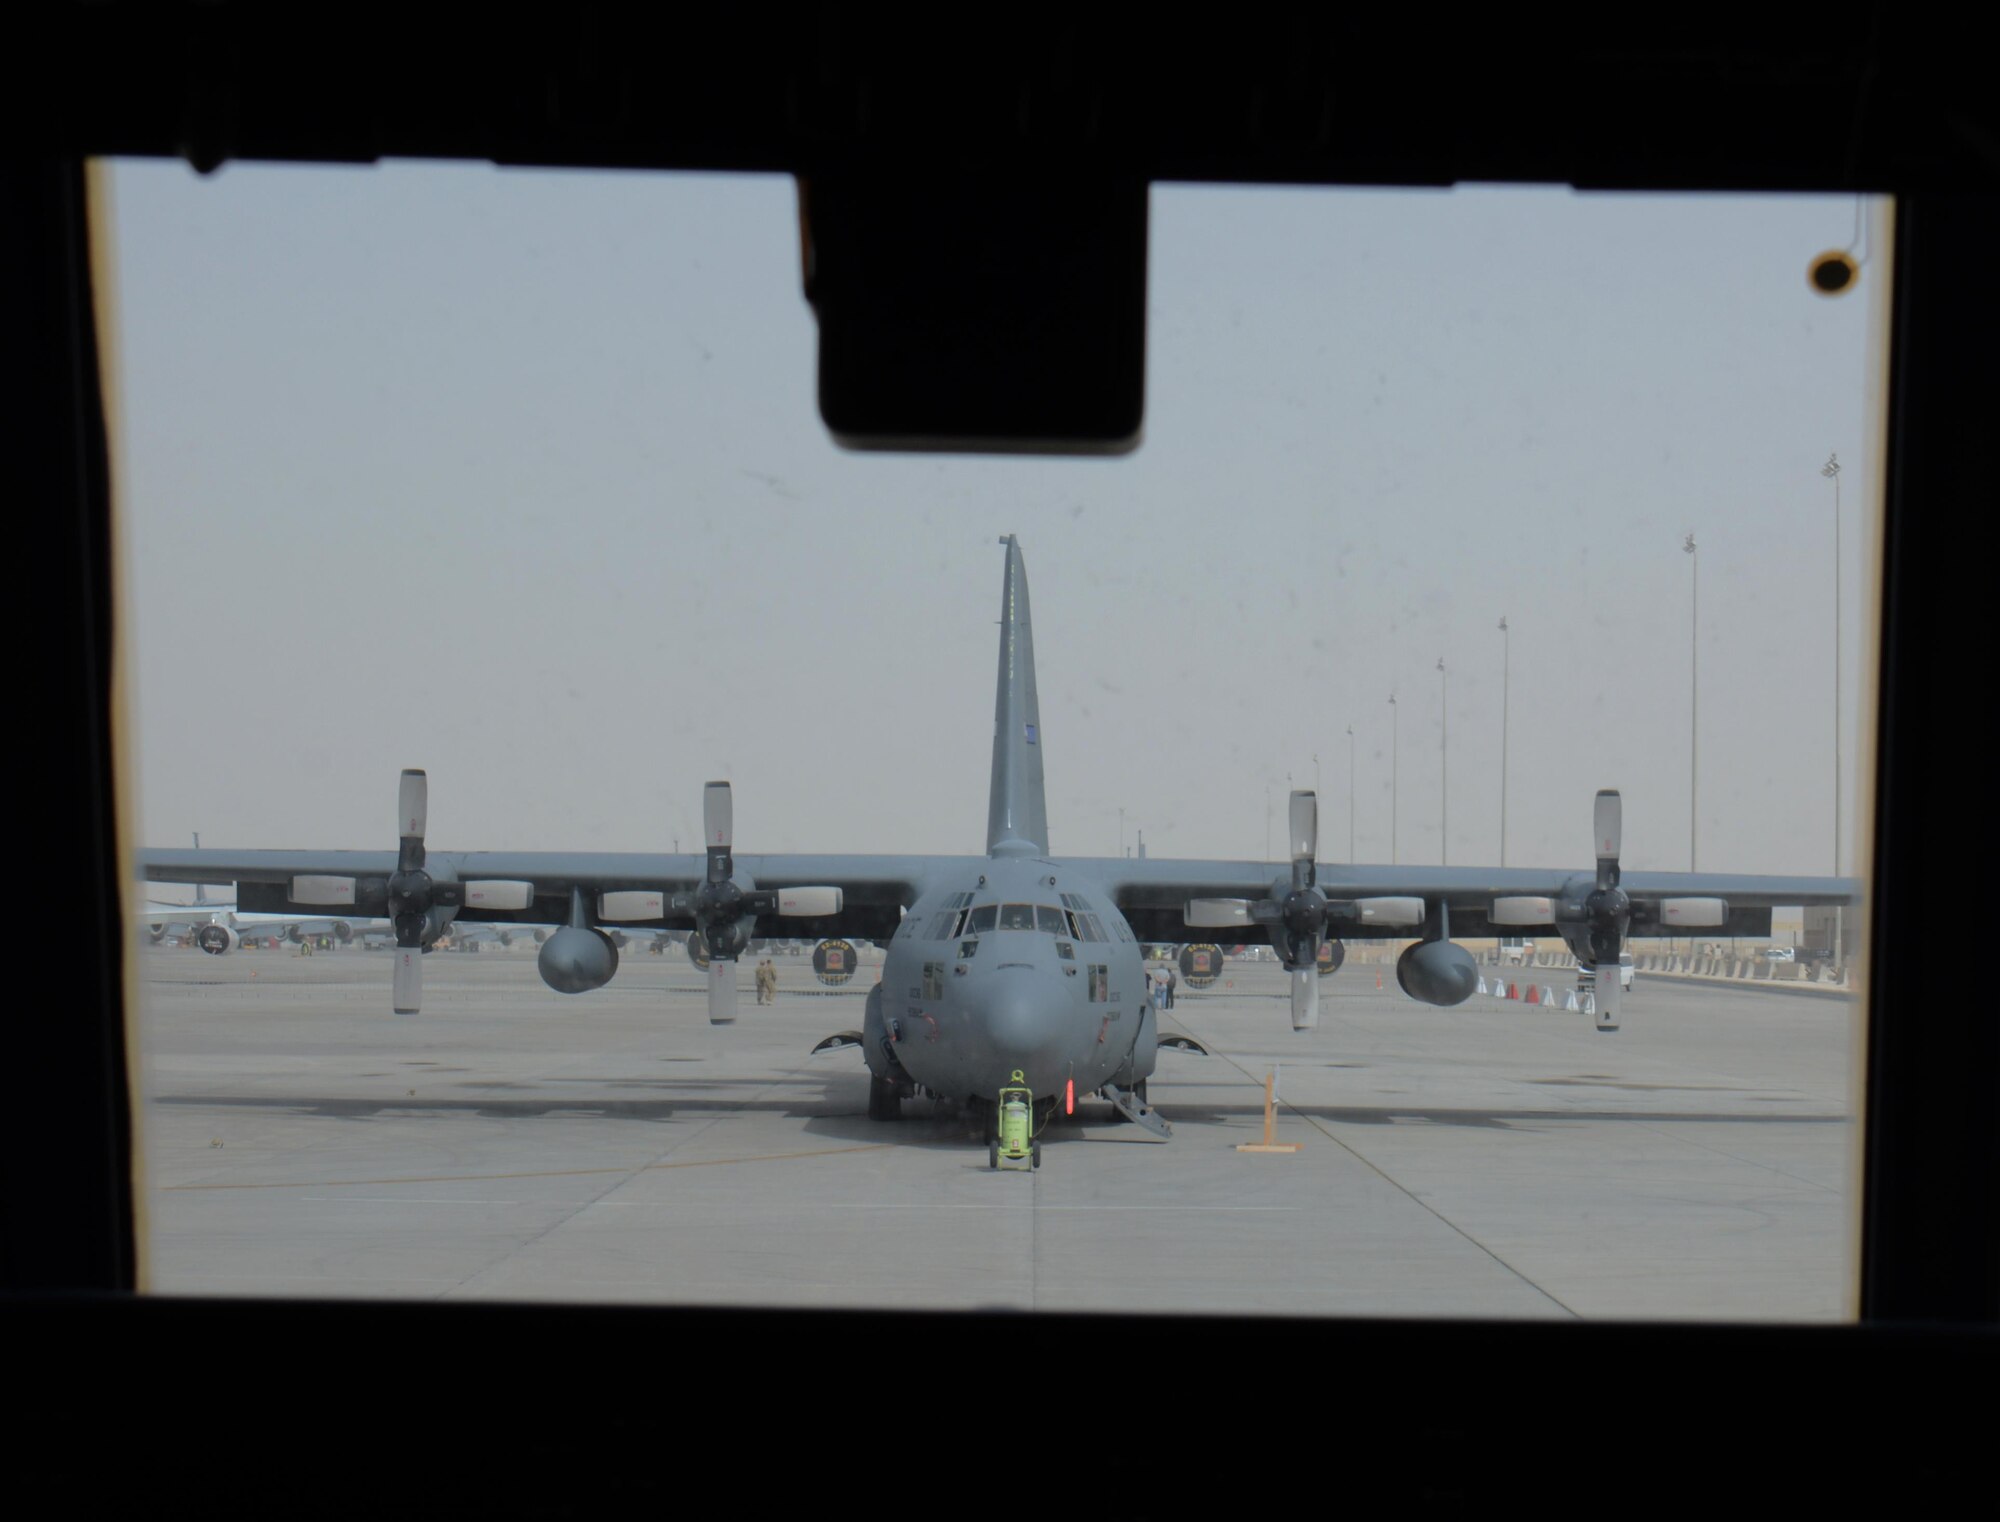 A C-130 Hercules deployed from Maxwell Air Force Base, Alabama, waits for visitors at the annual Flight Line Fest Jan. 10 at Al Udeid Air Base, Qatar. The plane, which can take-off with a maximum weight of 155,000 pounds, was one of five U.S. Air Force aircraft on display during the event. Flight Line Fest is a joint partnership between the 379th Air Expeditionary Wing and Qatar Emiri Air Force held to foster relations between Qatar and the United States. (U.S. Air Force photo by Tech. Sgt. James Hodgman/Released)